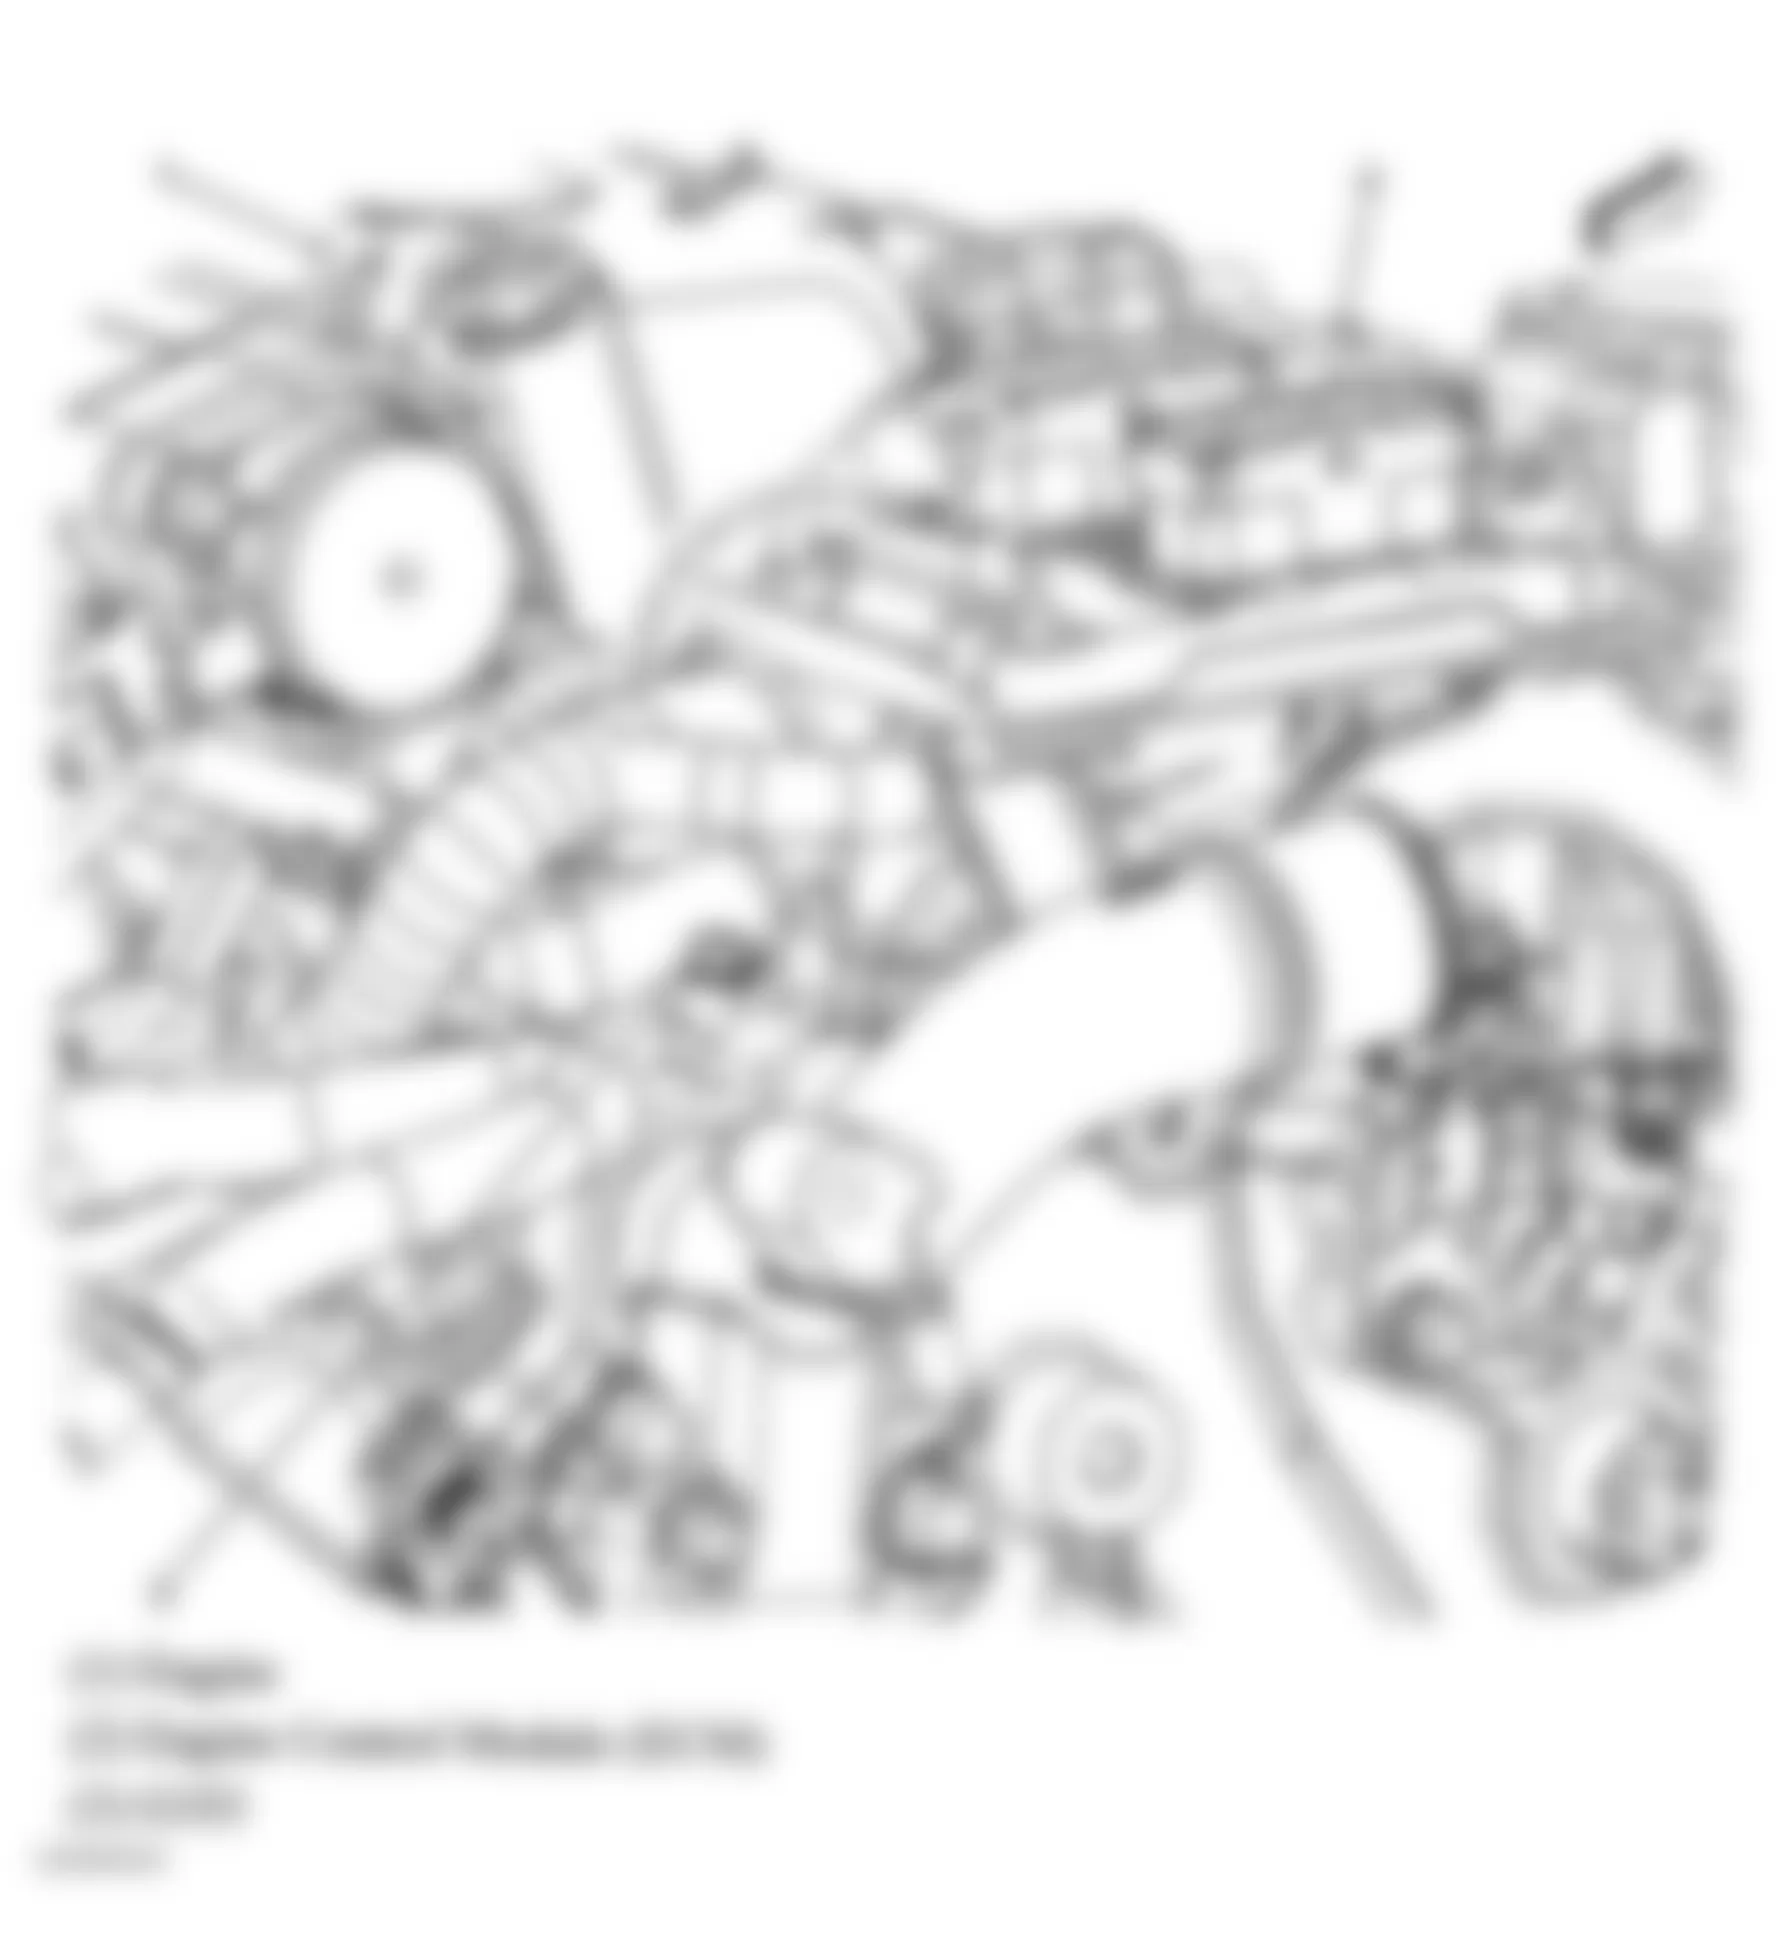 Buick Allure CX 2005 - Component Locations -  Engine Assembly (3.6L)